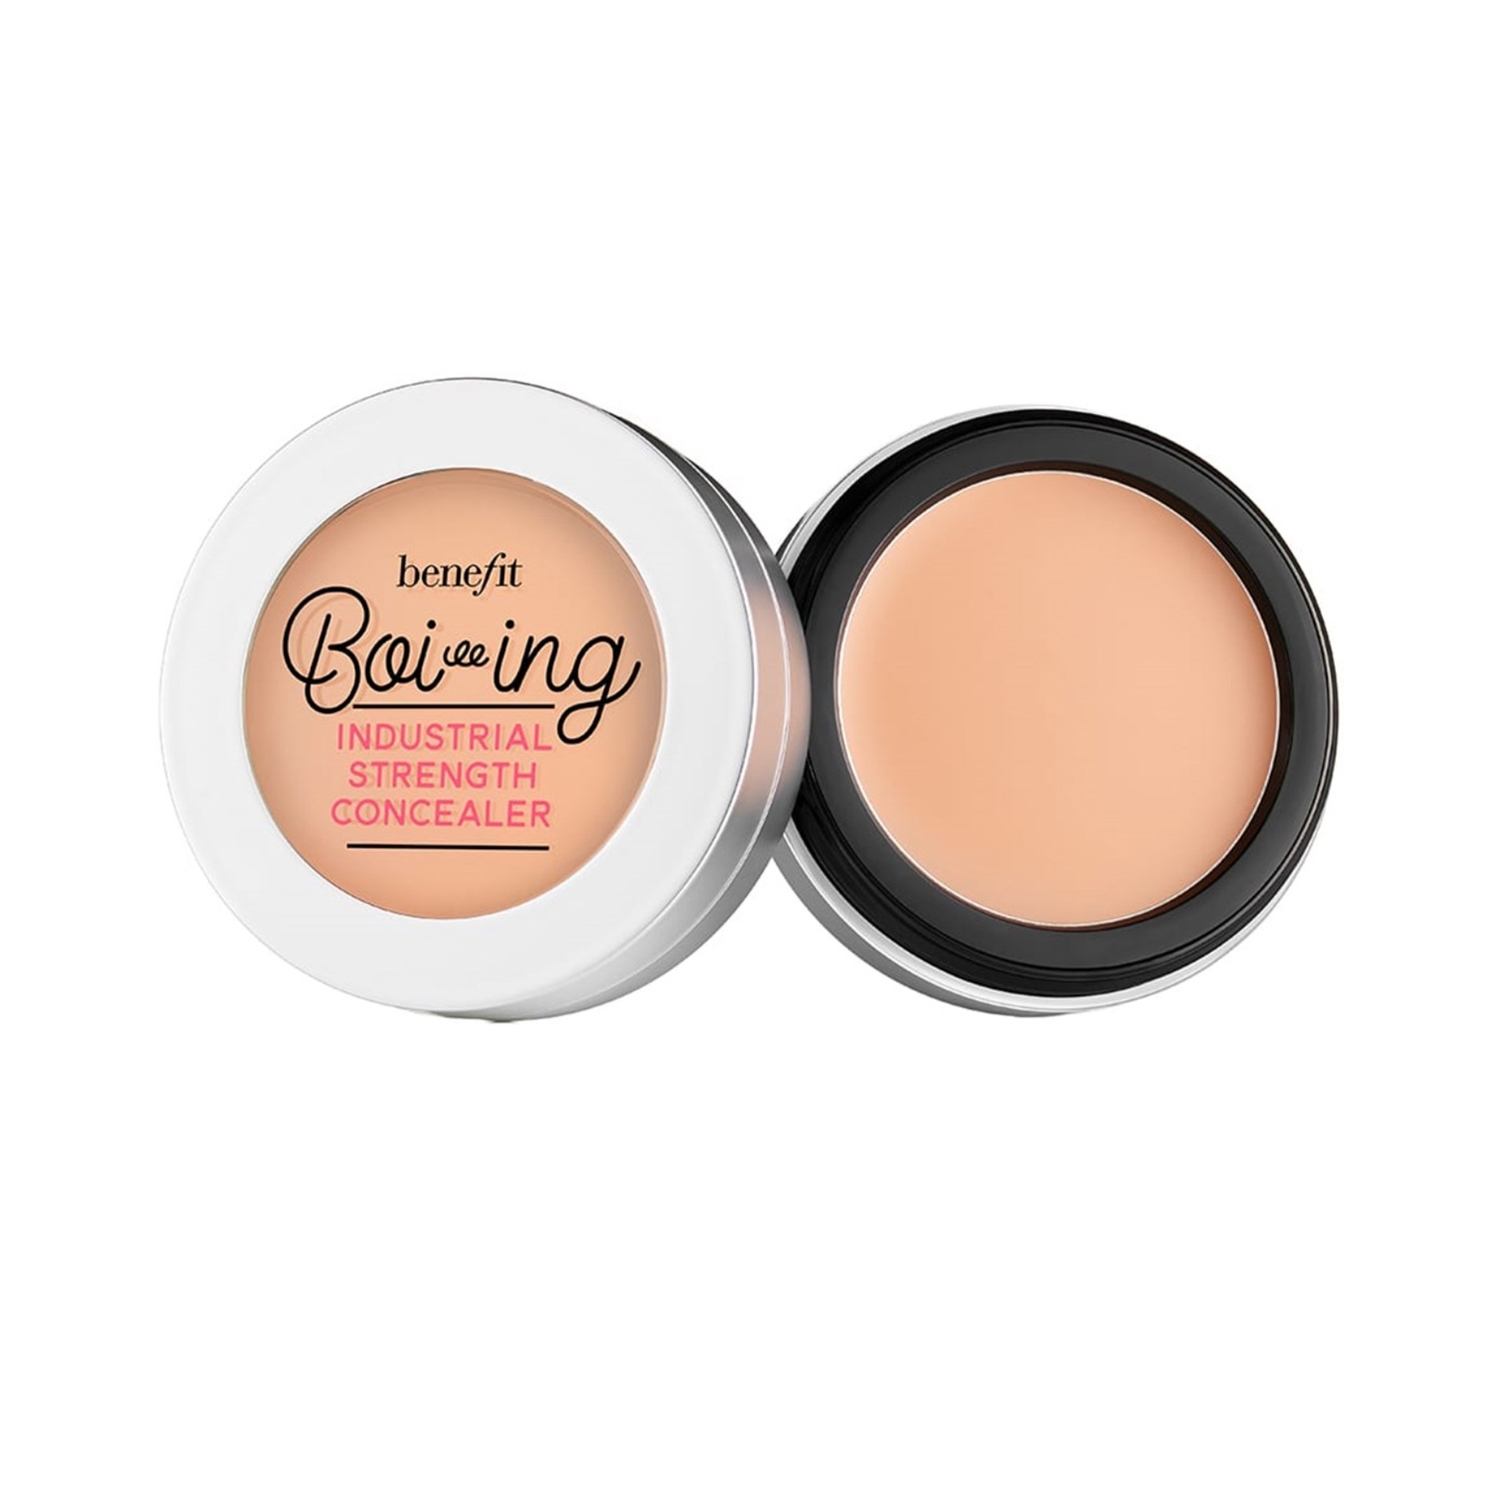 Benefit Cosmetics | Benefit Cosmetics Boi-ing Industrial Strength Concealer - 02 Light Cool (3g)